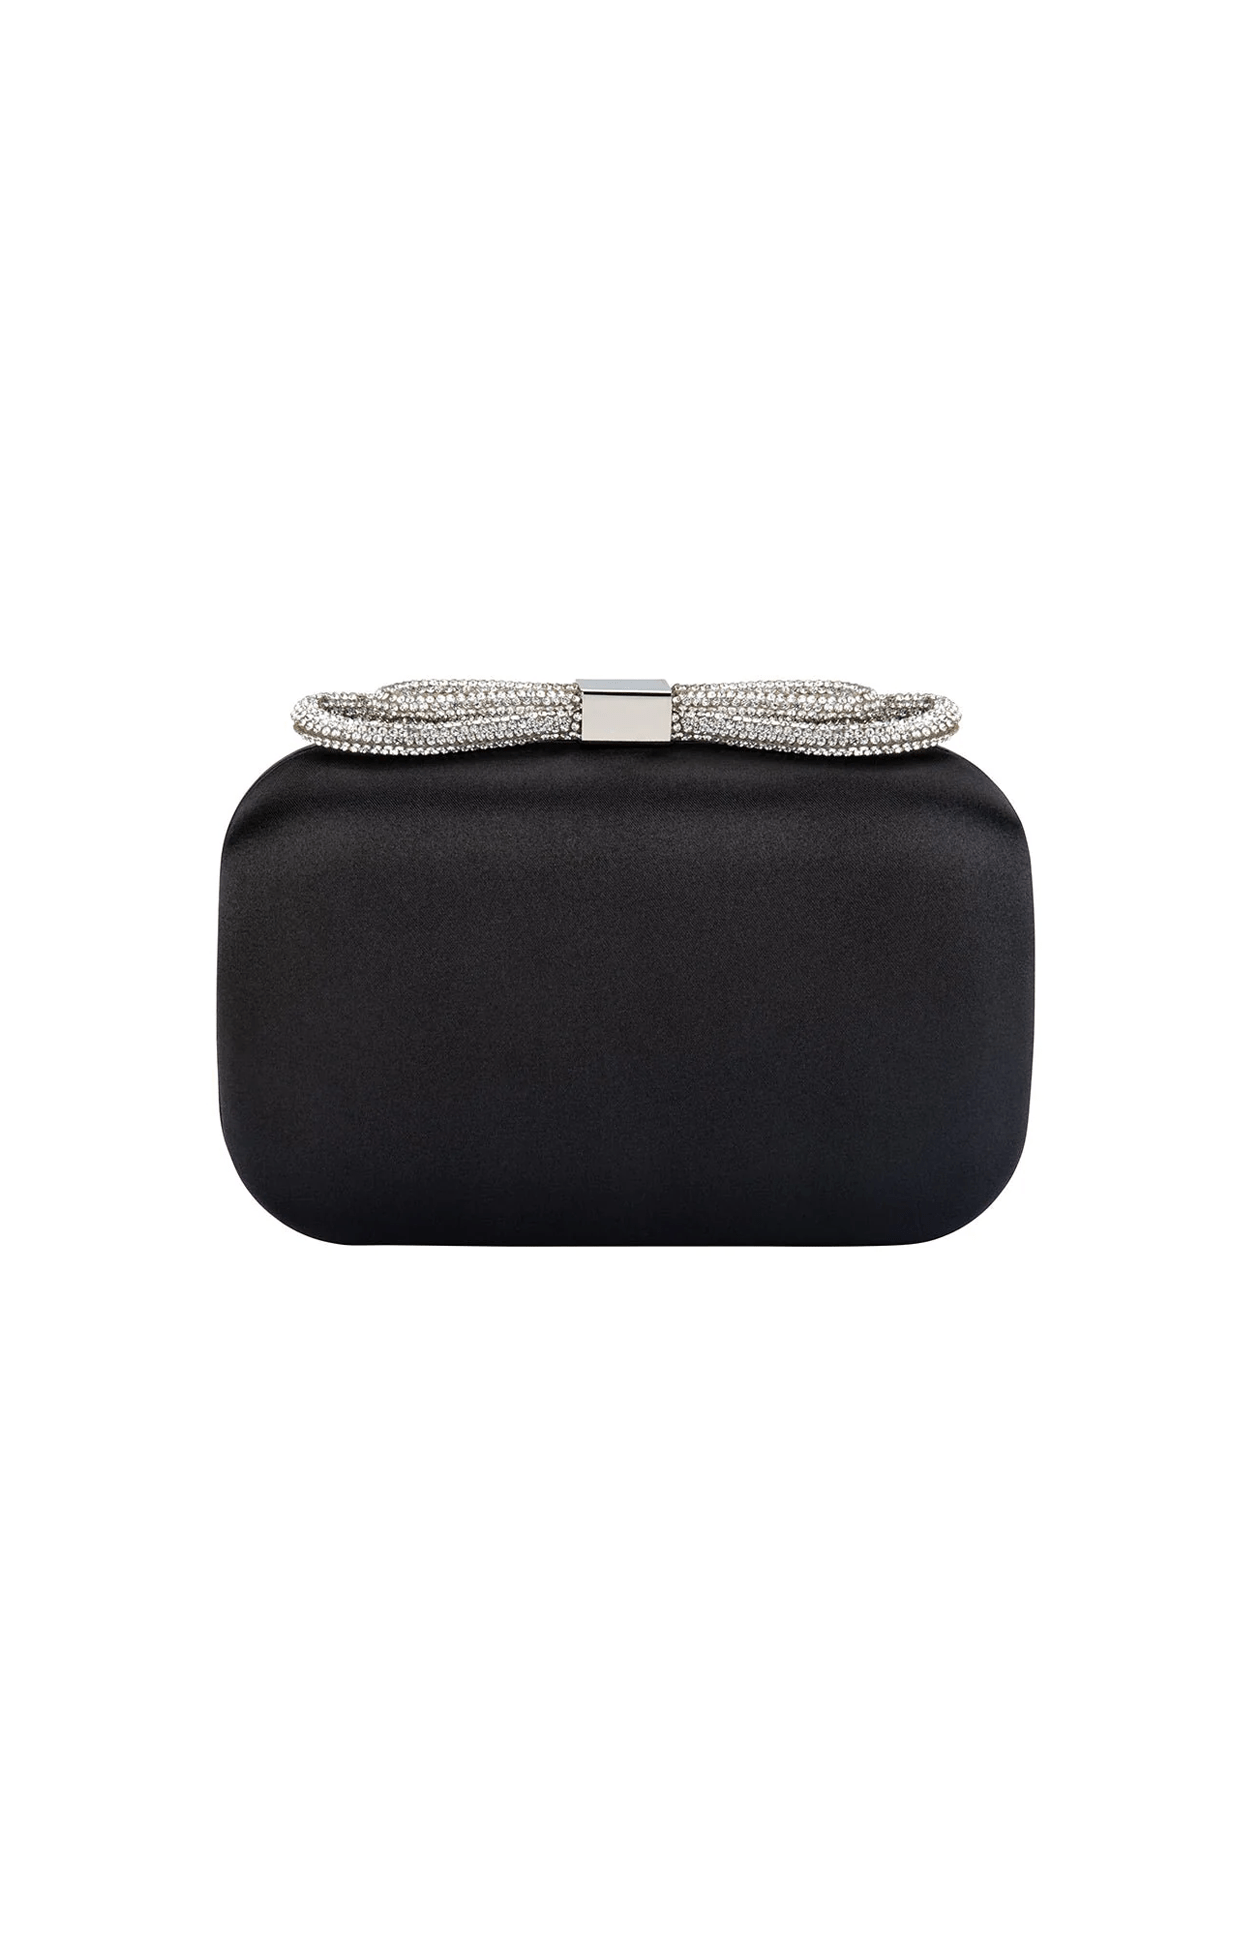 ACCESSORIES Bags Clutches One Size / Neutral ADA CRYSTAL BOW CLUTCH IN BLACK